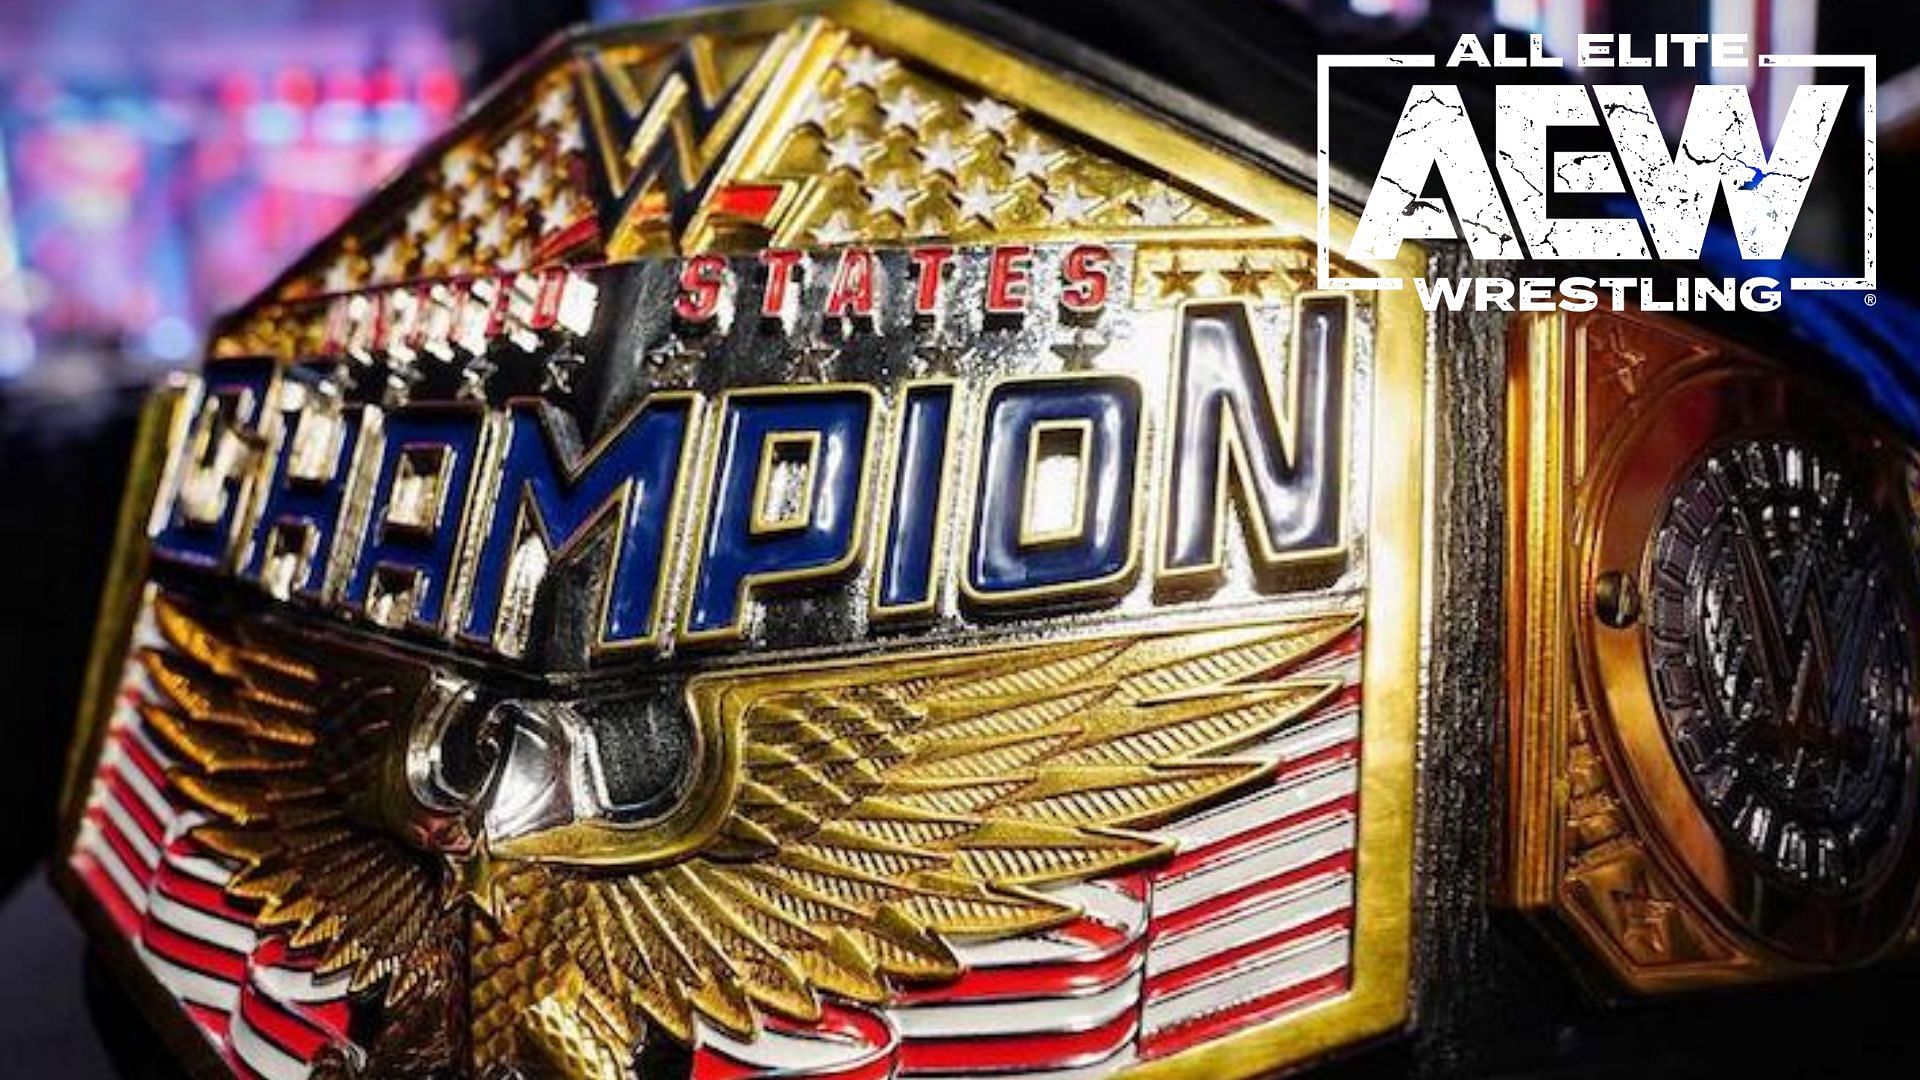 Former United States Champion unlikely to return to AEW until the spring